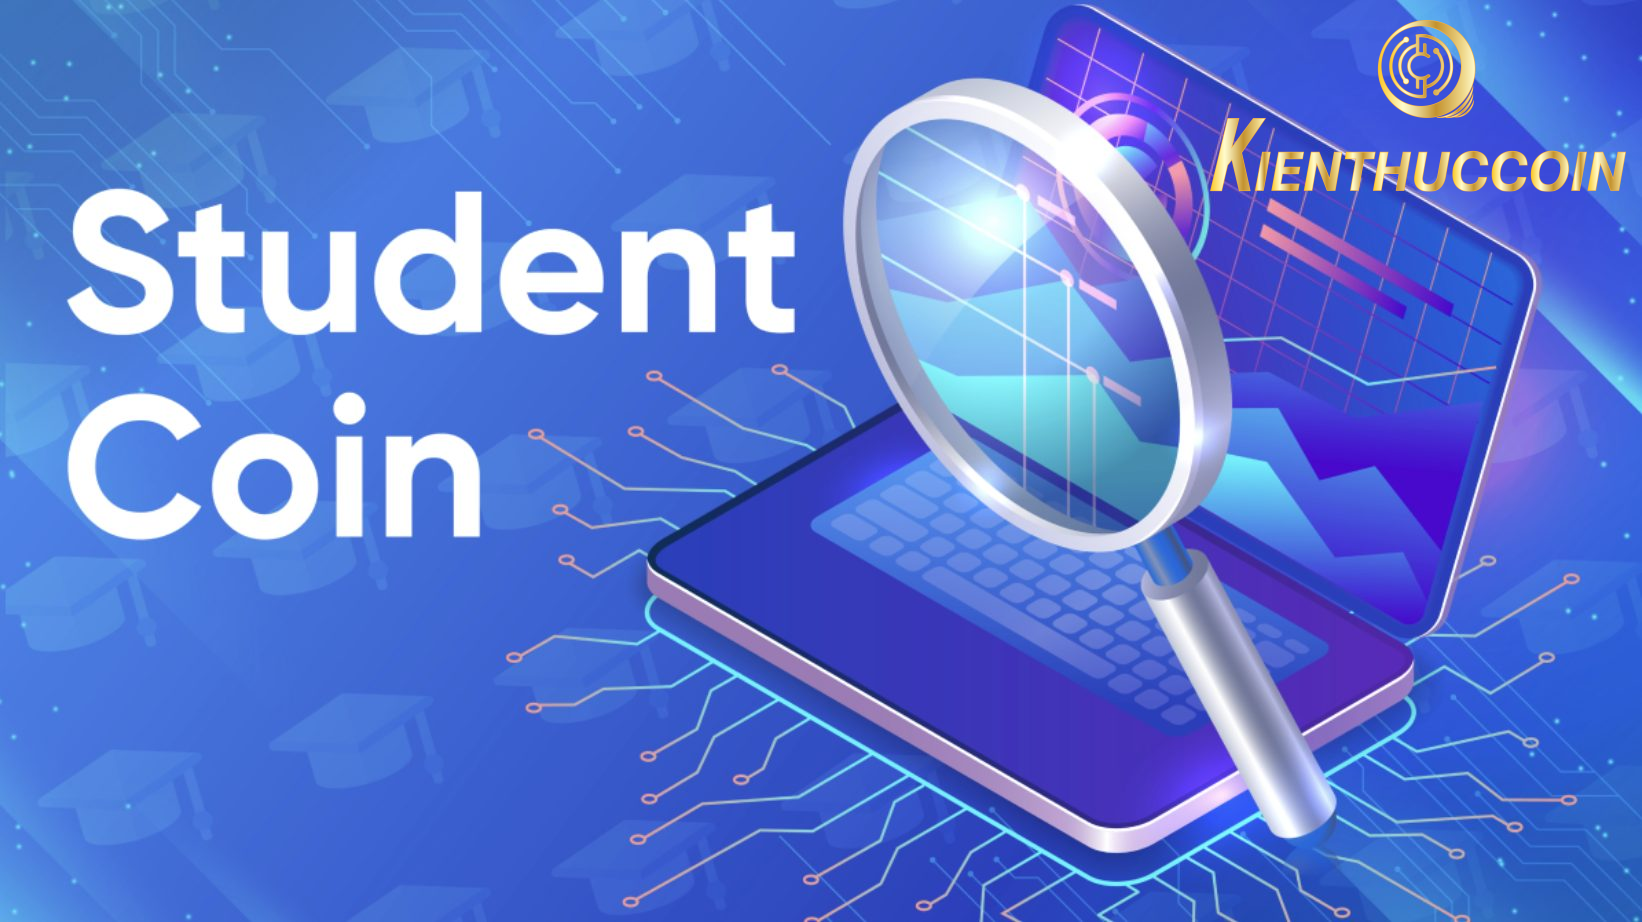 What is Student Coin and should I invest in it?